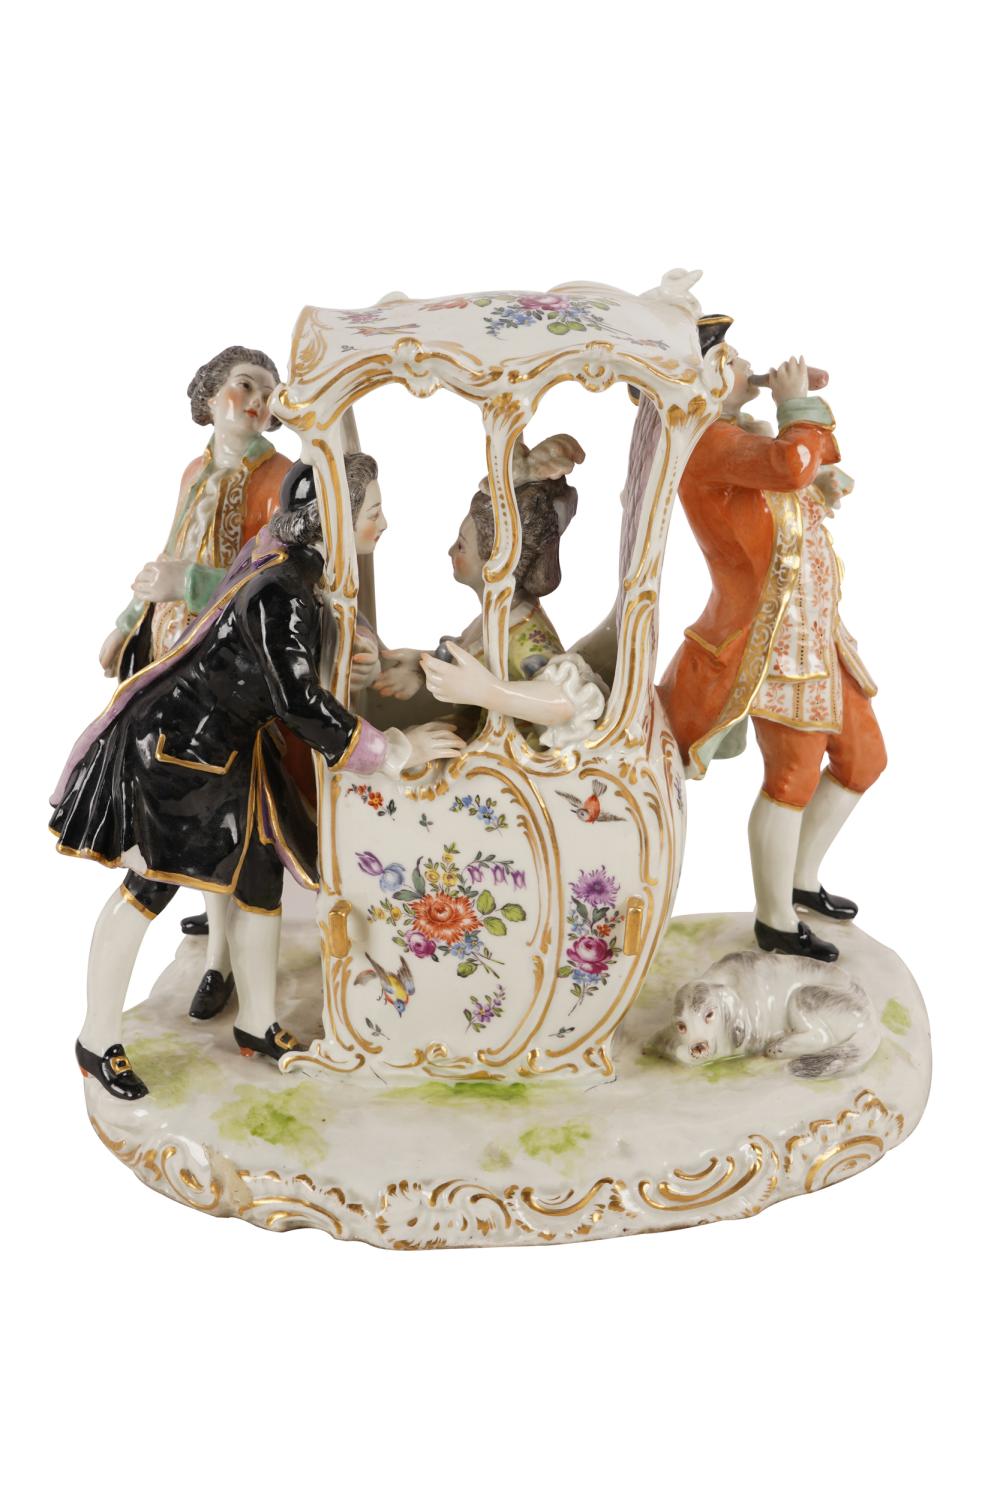 CONTINENTAL PORCELAIN CARRIAGE